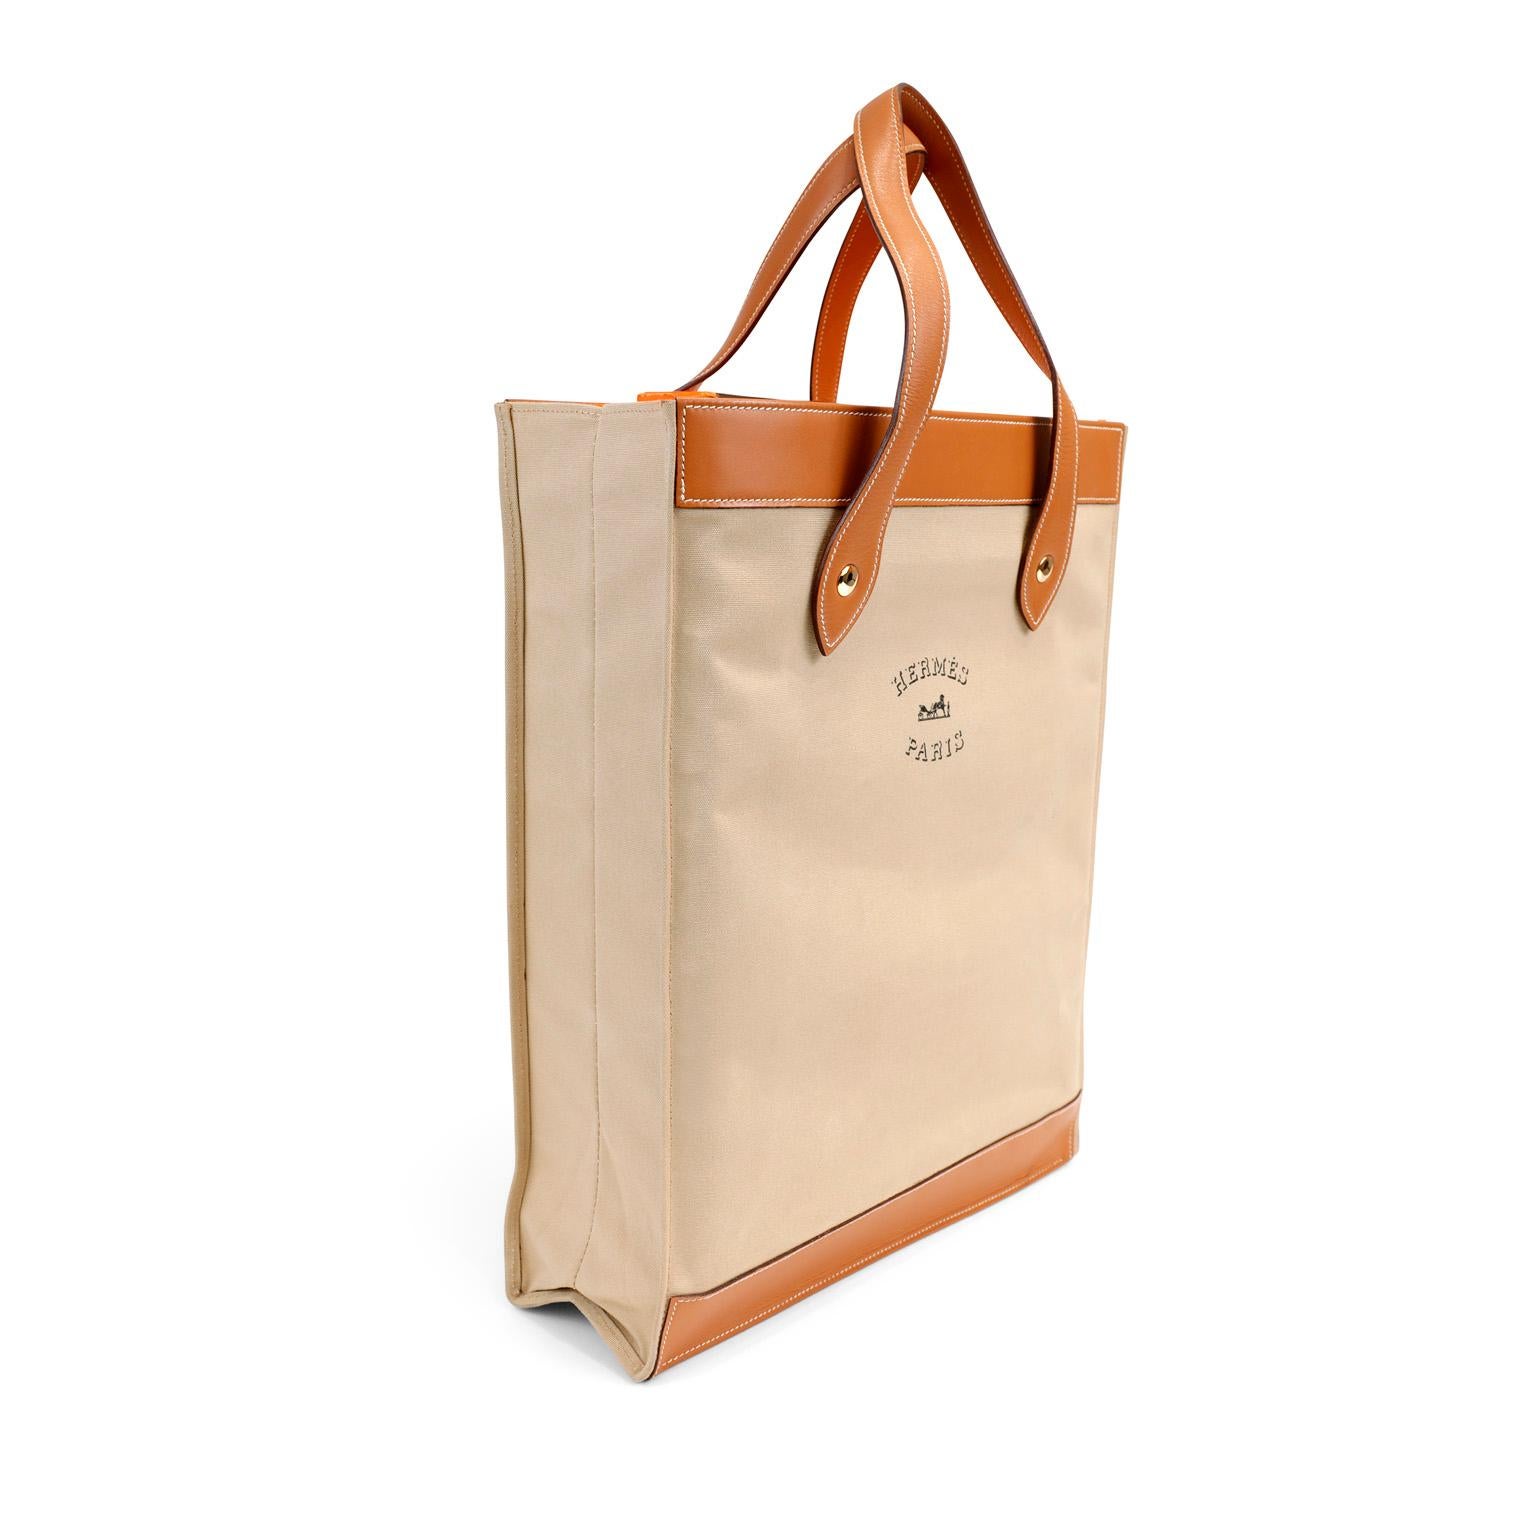 This authentic Hermès Canvas and Gold Swift Leather Unisex Tote is in excellent condition. Neutral beige canvas is supported by sturdy leather bottom, trim and handles. White stitching contrasts beautifully with the saddle colored leather.  
Made in